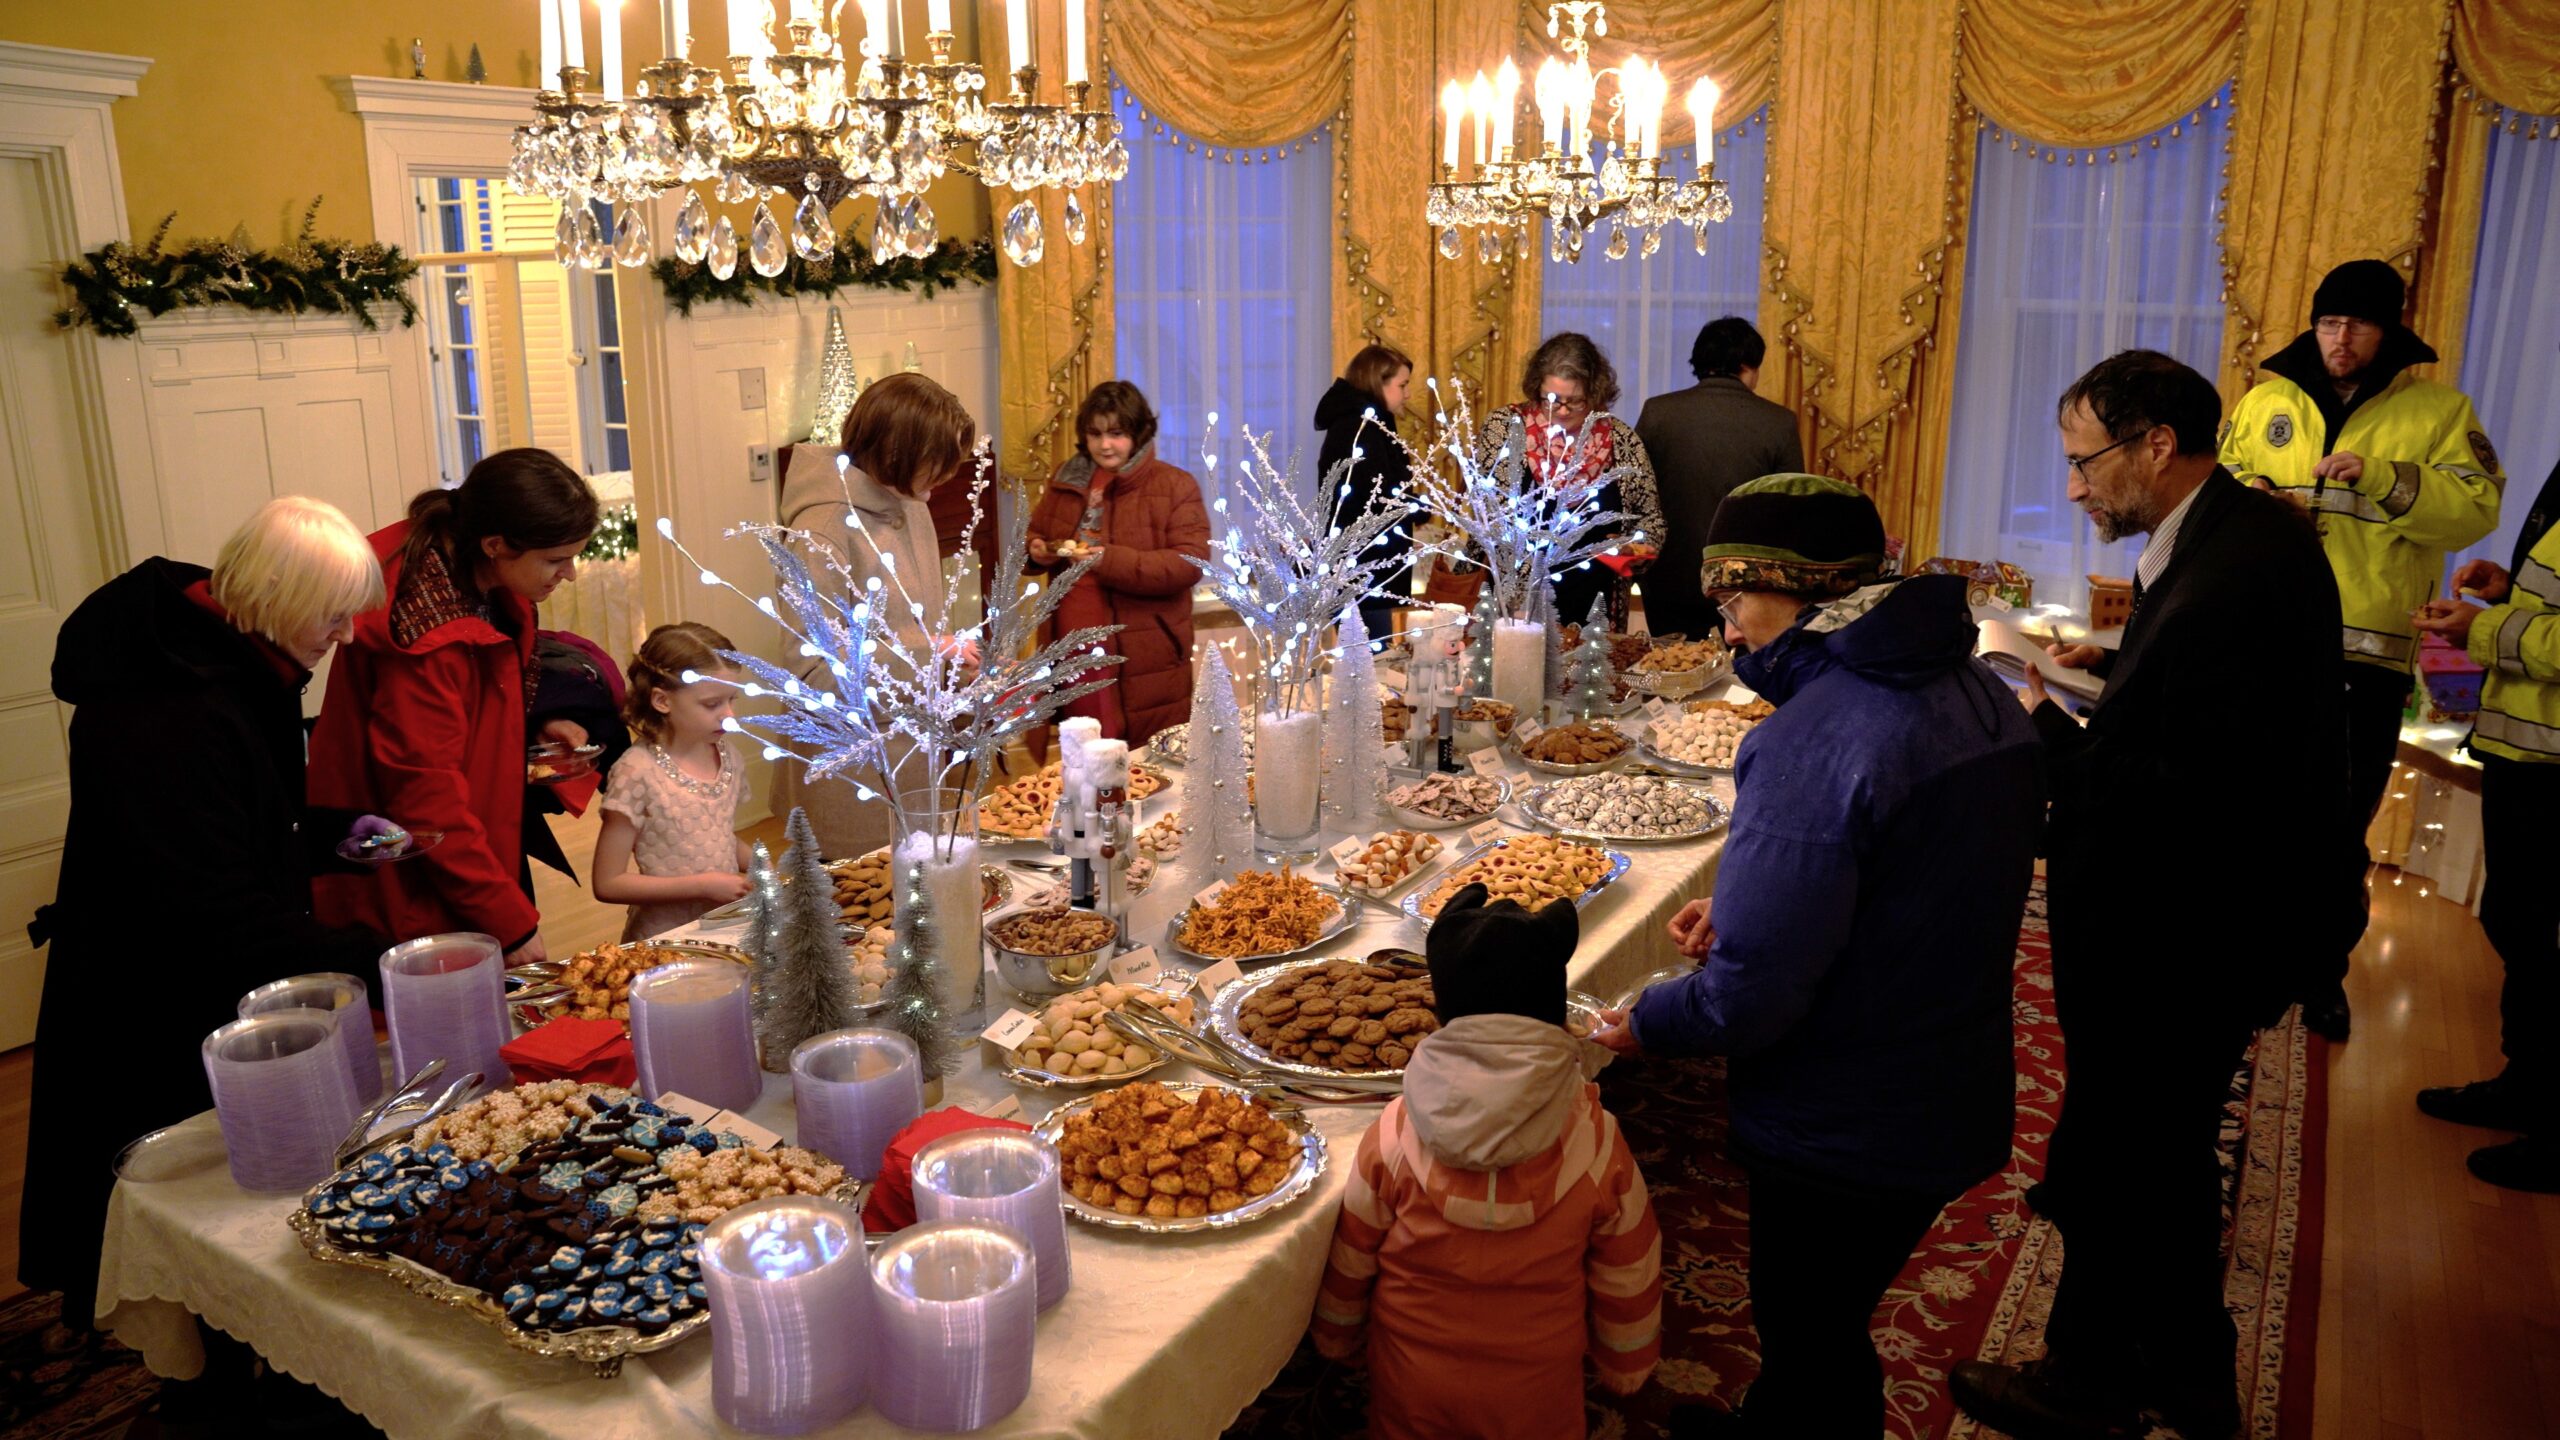 People taking holiday cookies from a large table